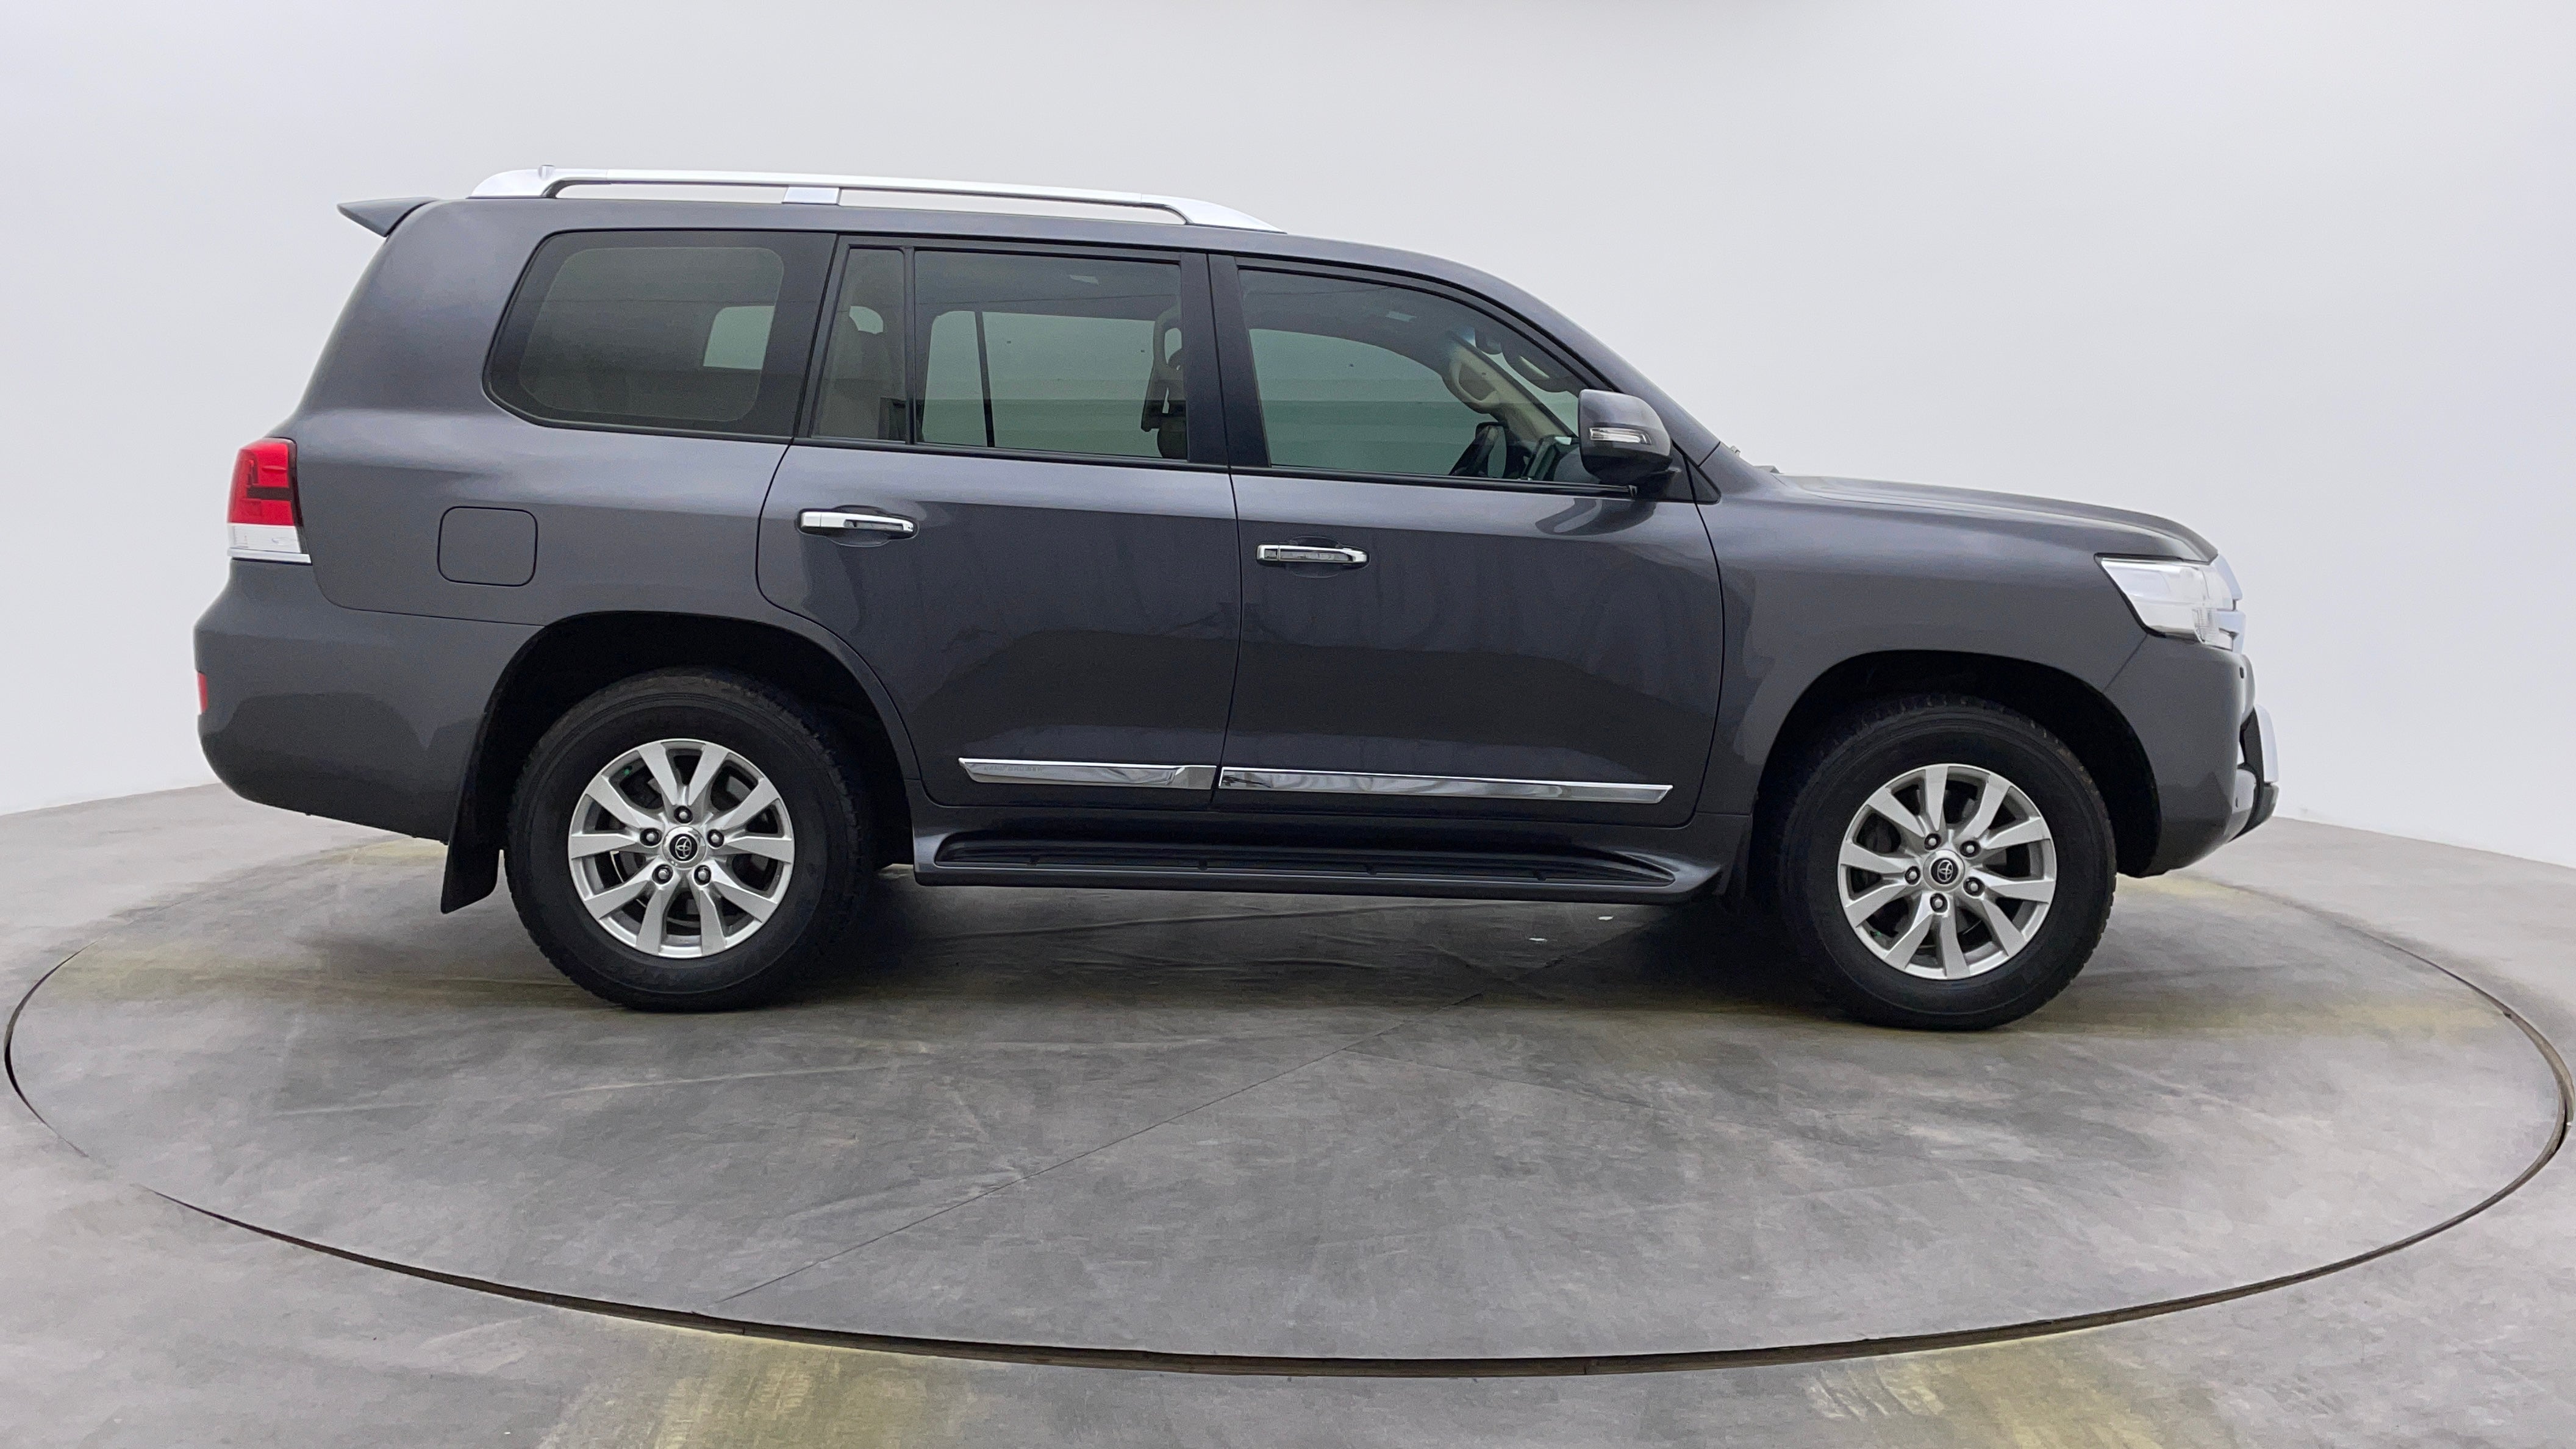 Toyota Landcruiser-Right Side View